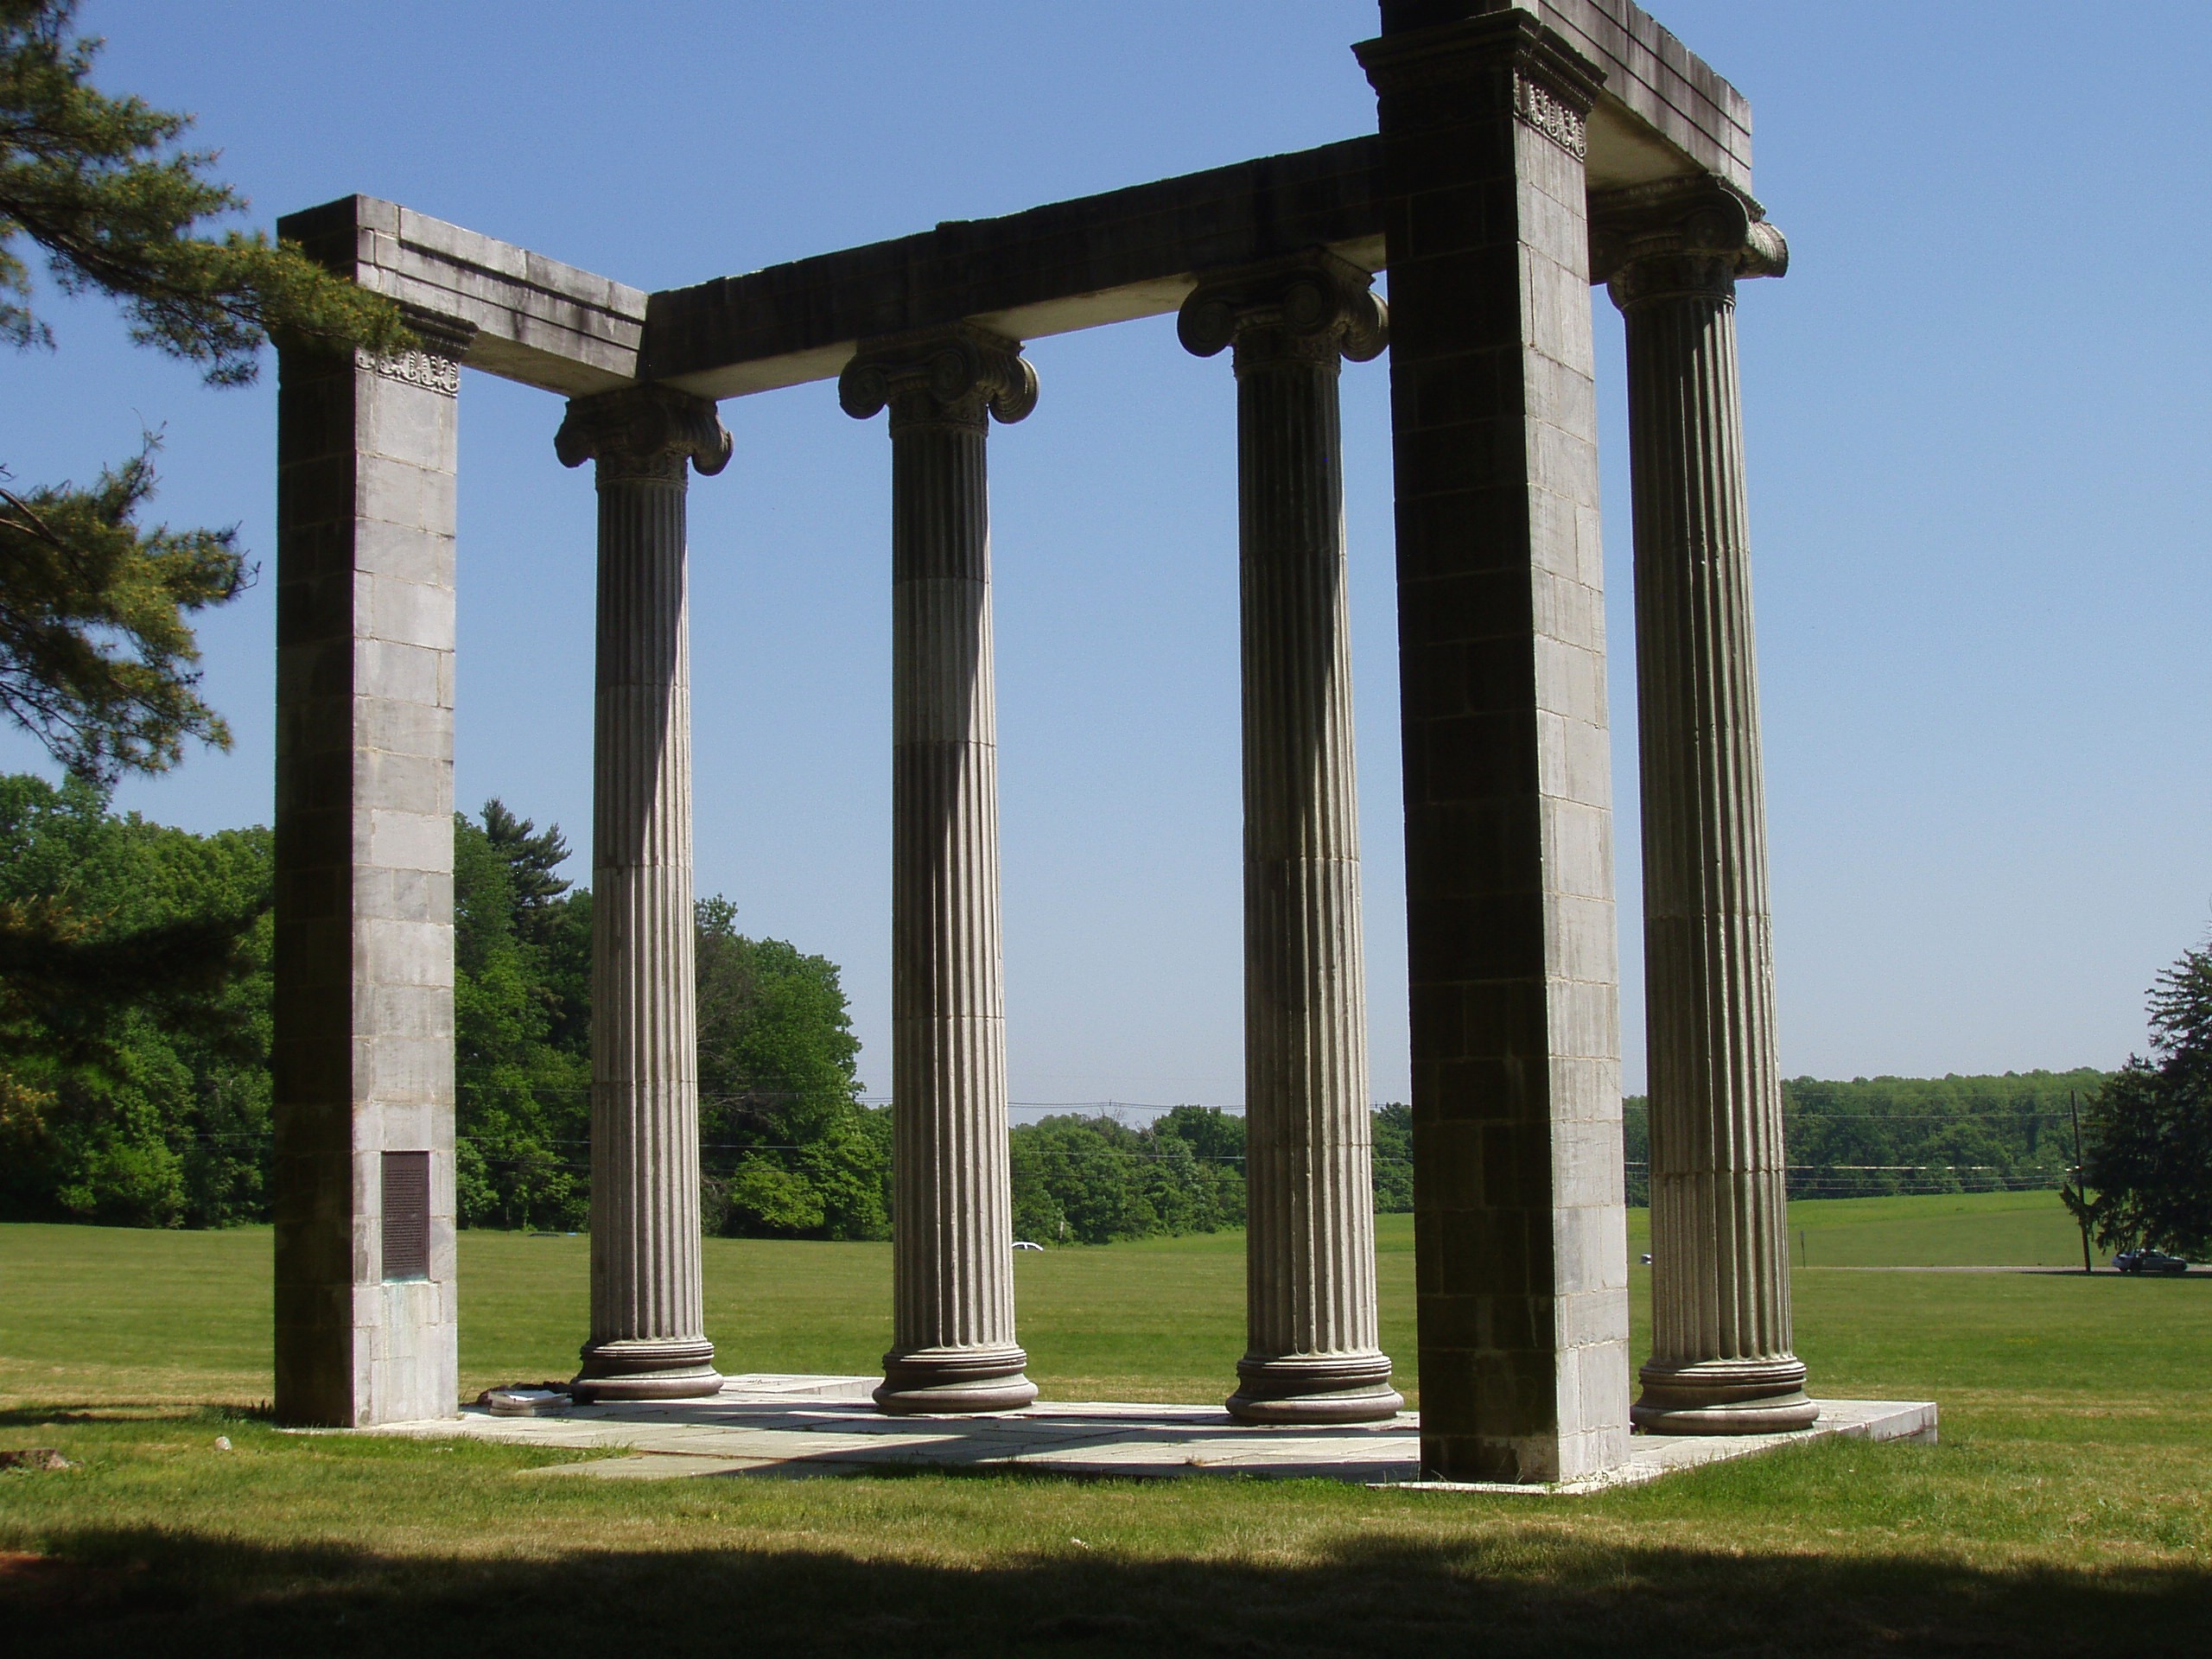 A large structure of columns sits in a field of grass at the Princeton Battlefield State Park